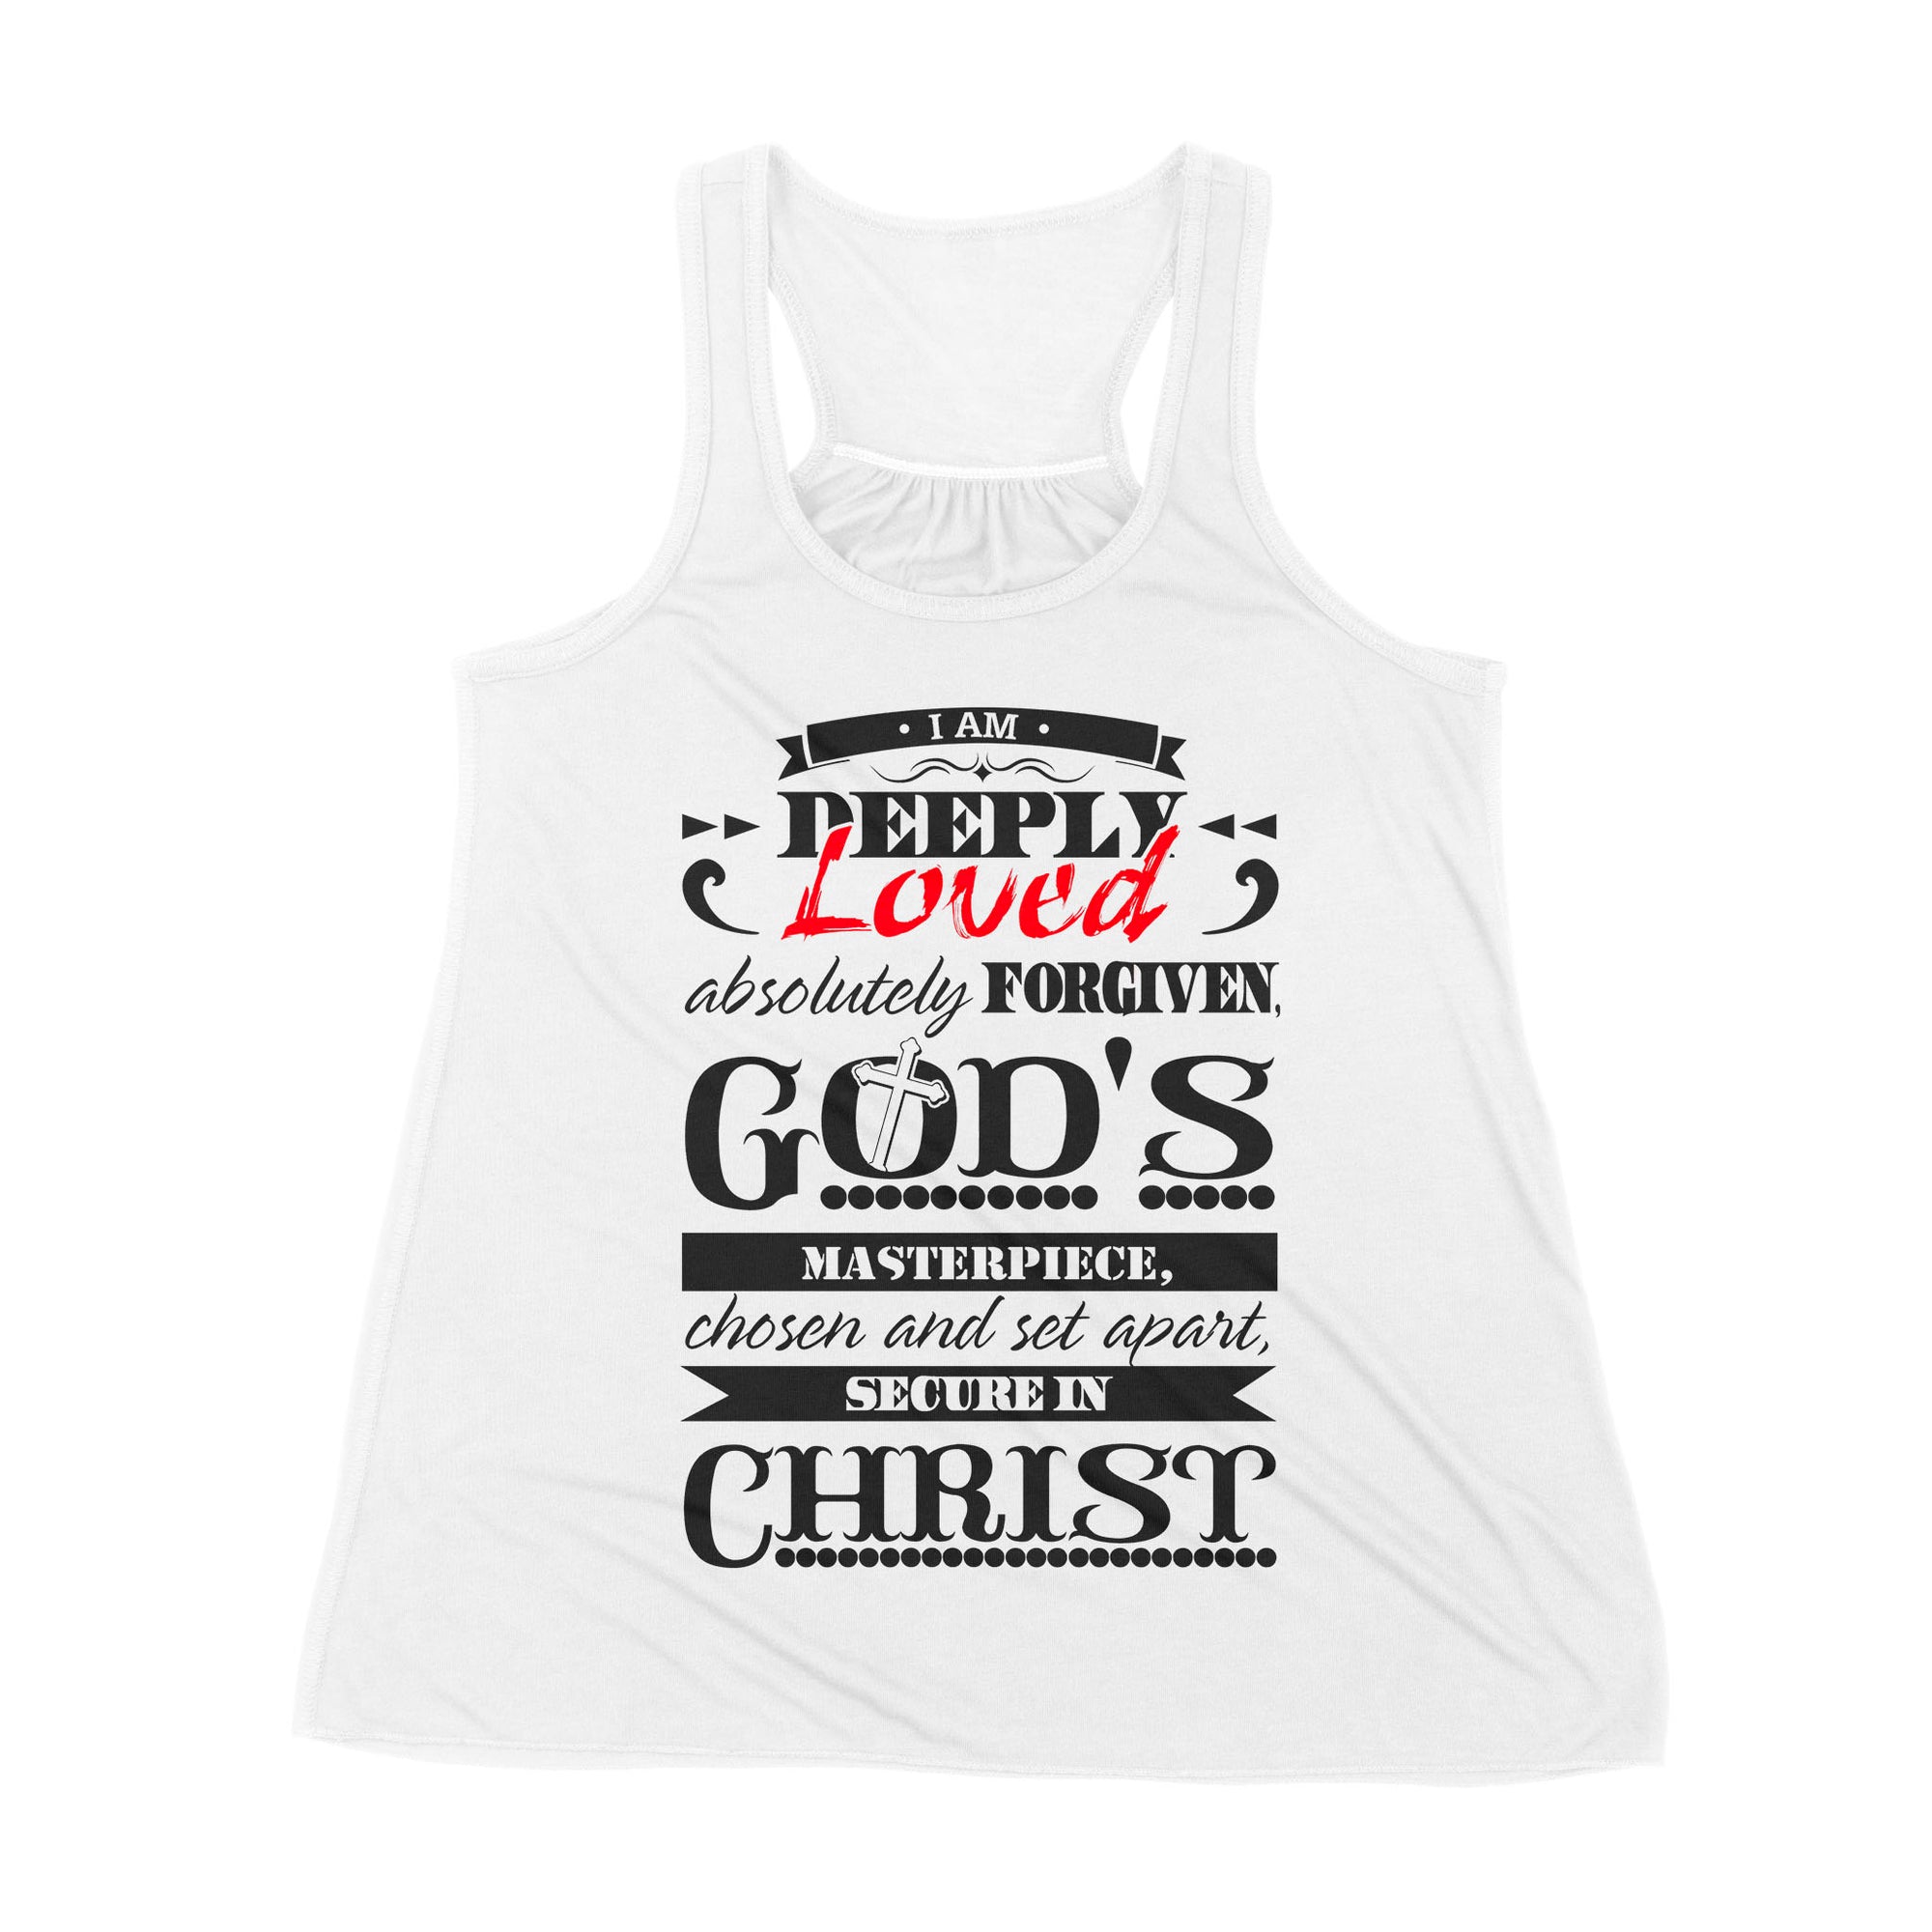 Premium Women's Tank - I Am Deeply Loved, Absolutely Forgiven, God's Masterpiece, Chosen and Set Apart, Secure in Christ